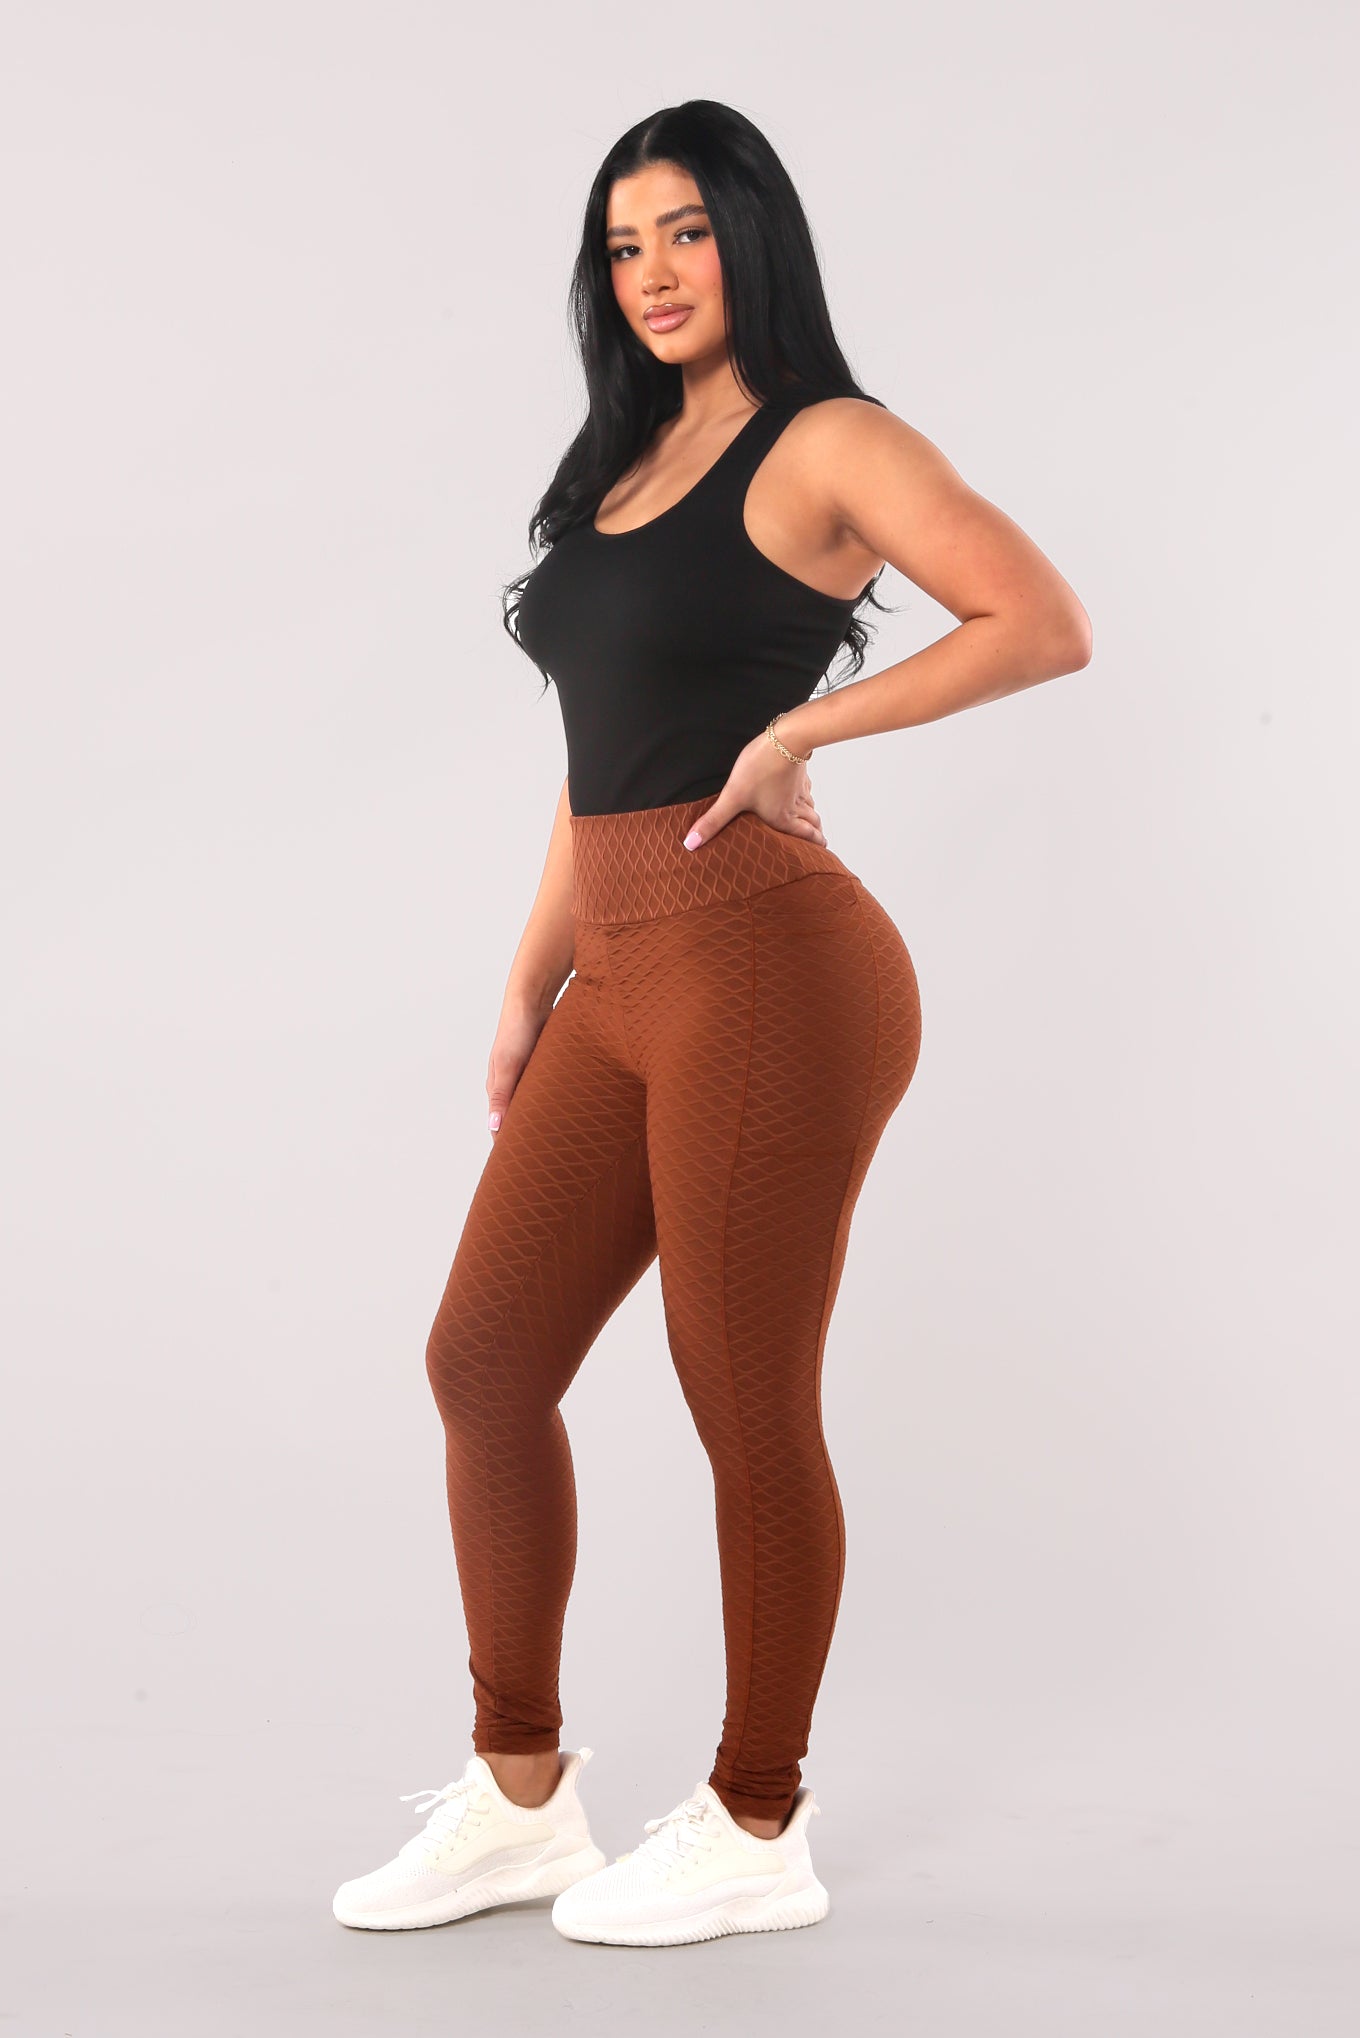 Shosho Stretchy Yoga Pants Multiple - $16 (46% Off Retail) - From